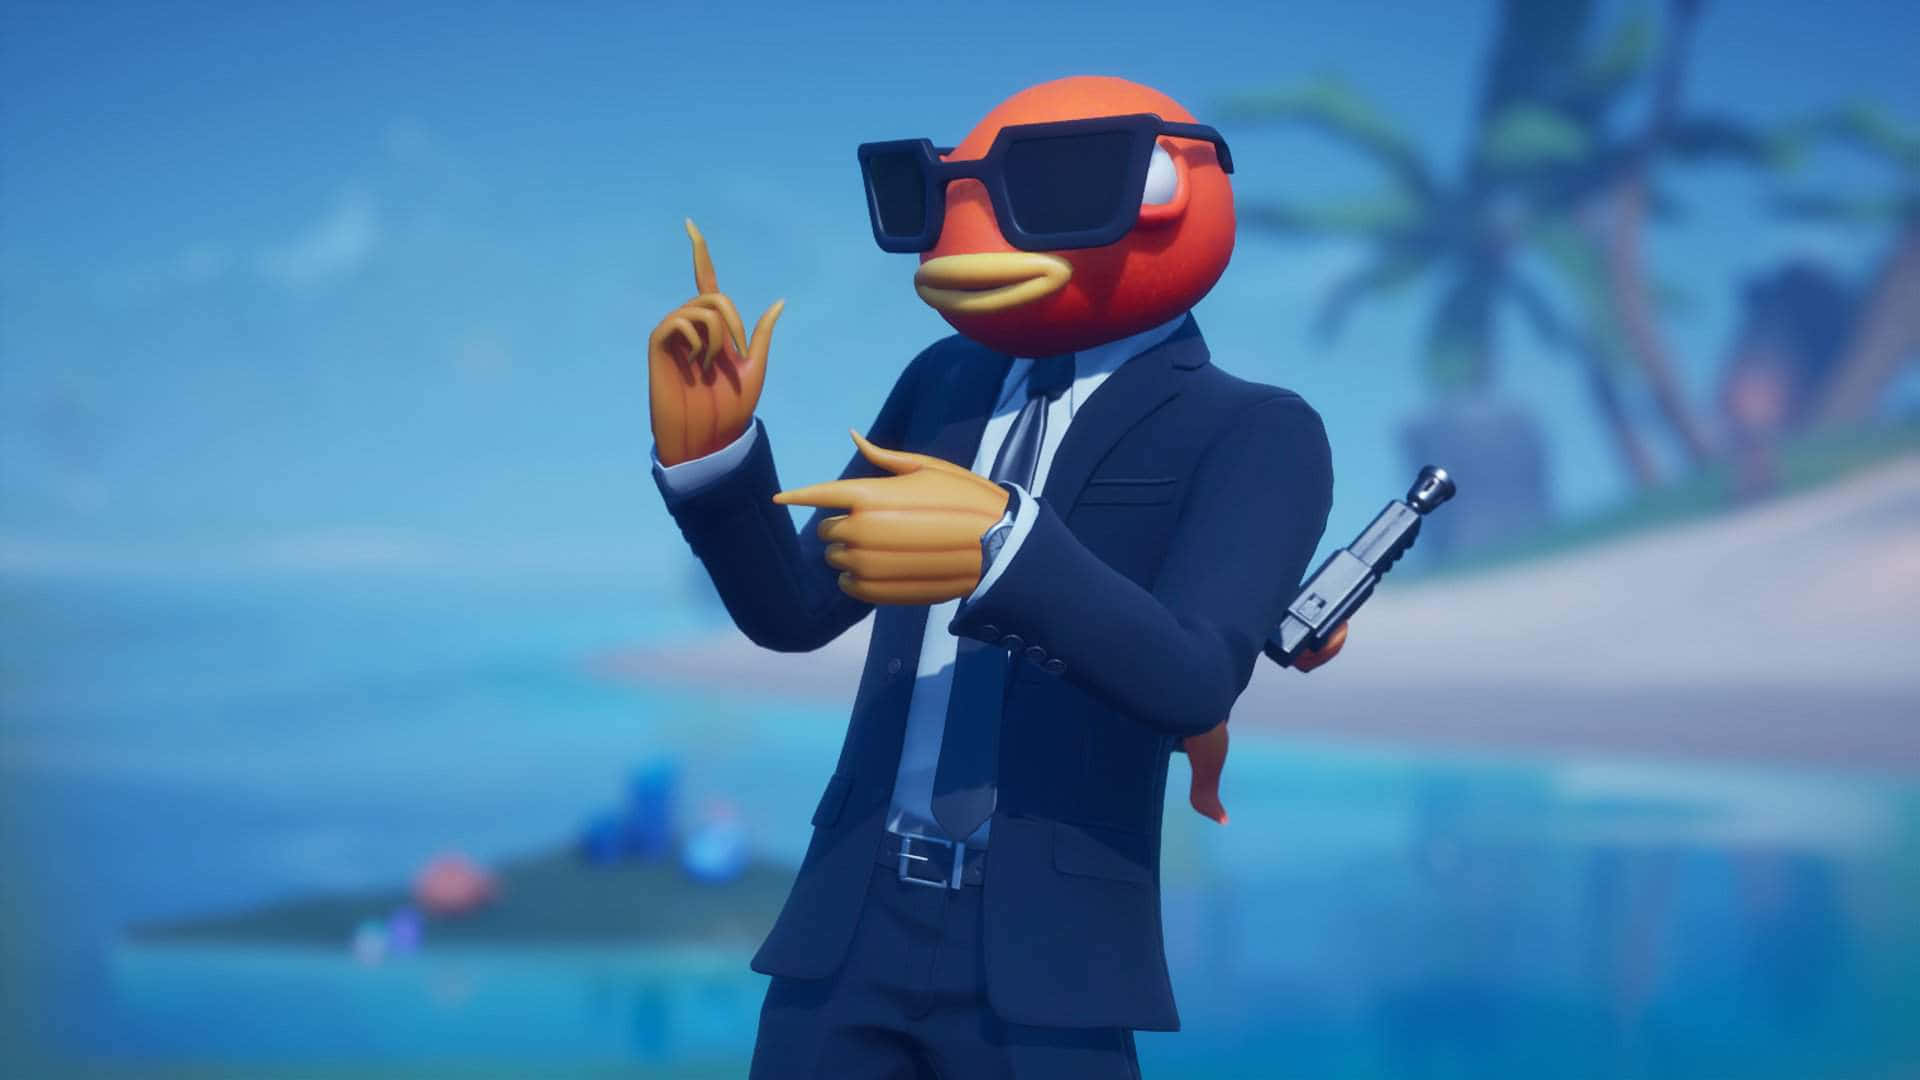 Play smarter not harder with the original Fortnite Fishstick Wallpaper